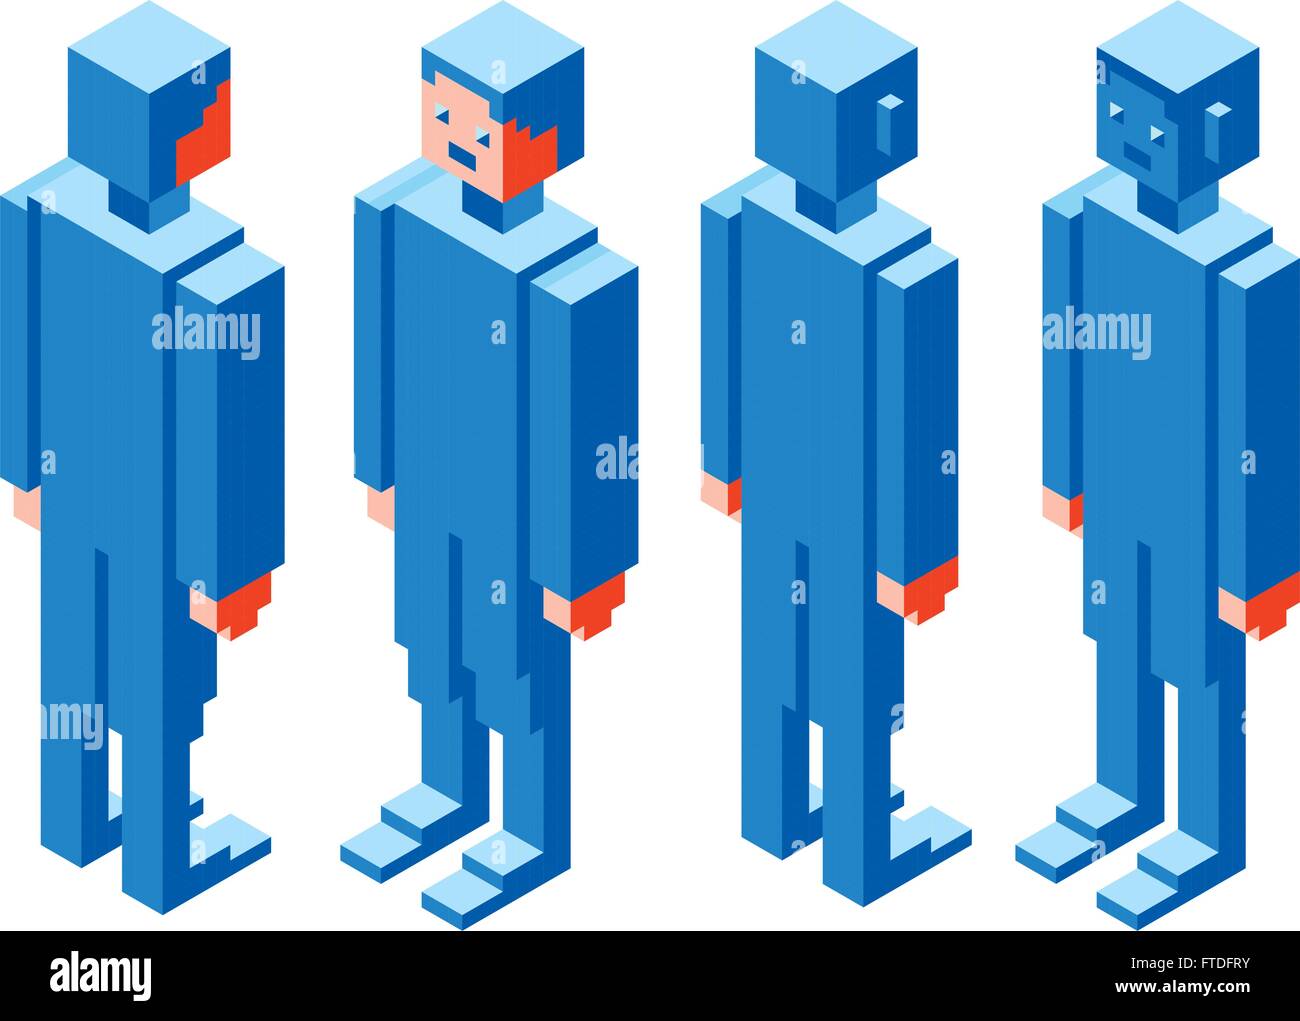 Simple 3D Vector Boxed Character Stock Vector